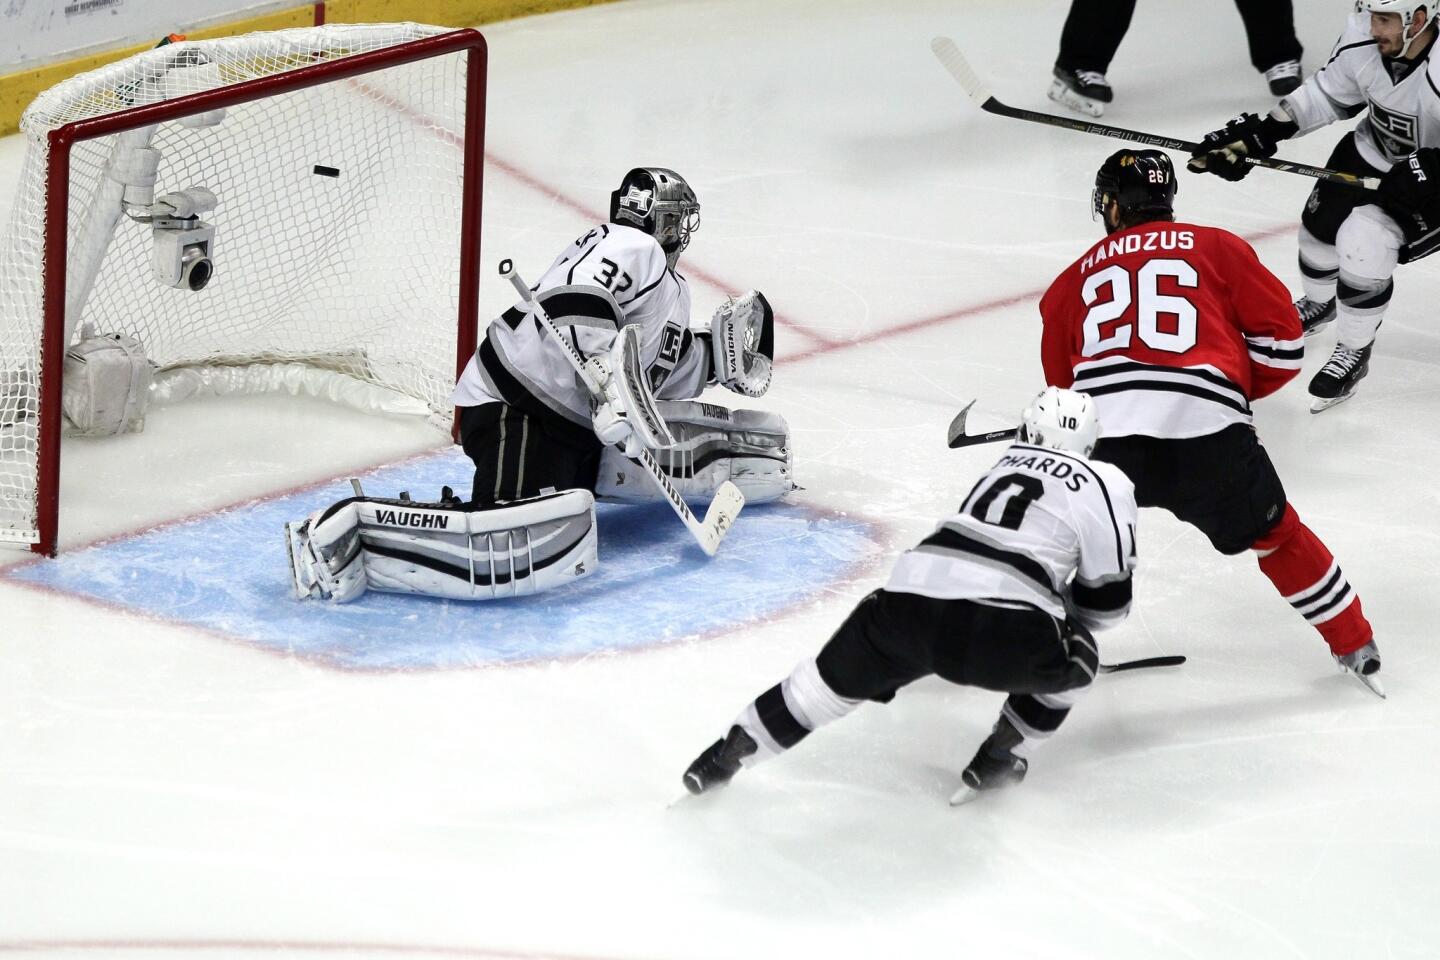 Chicago Blackhawks forward Michal Handzus, right, scores the winning goal past Kings goalie Jonathan Quick in double overtime in the Kings' 5-4 loss in Game 5 of the Western Conference finals.